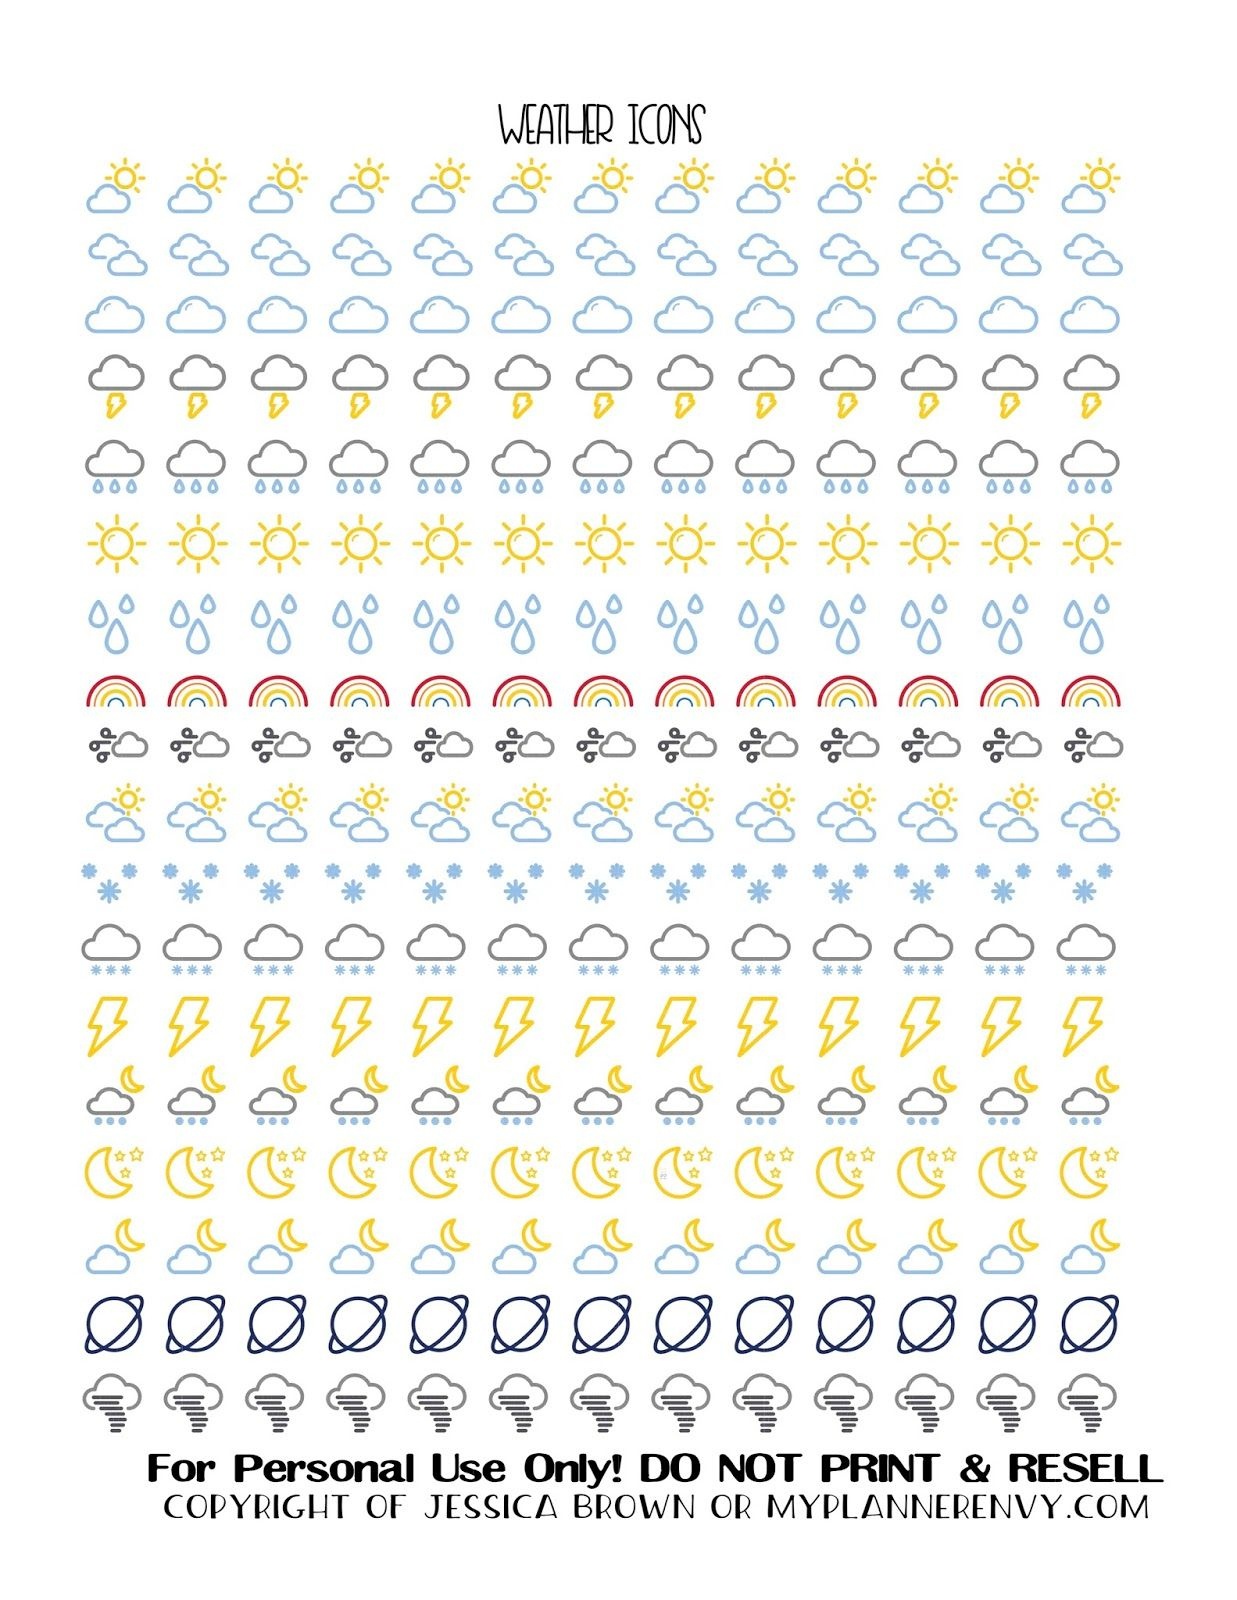 Free Printable Weather Icon Stickers From Myplannerenvy | Mijn - Free Printable Icons